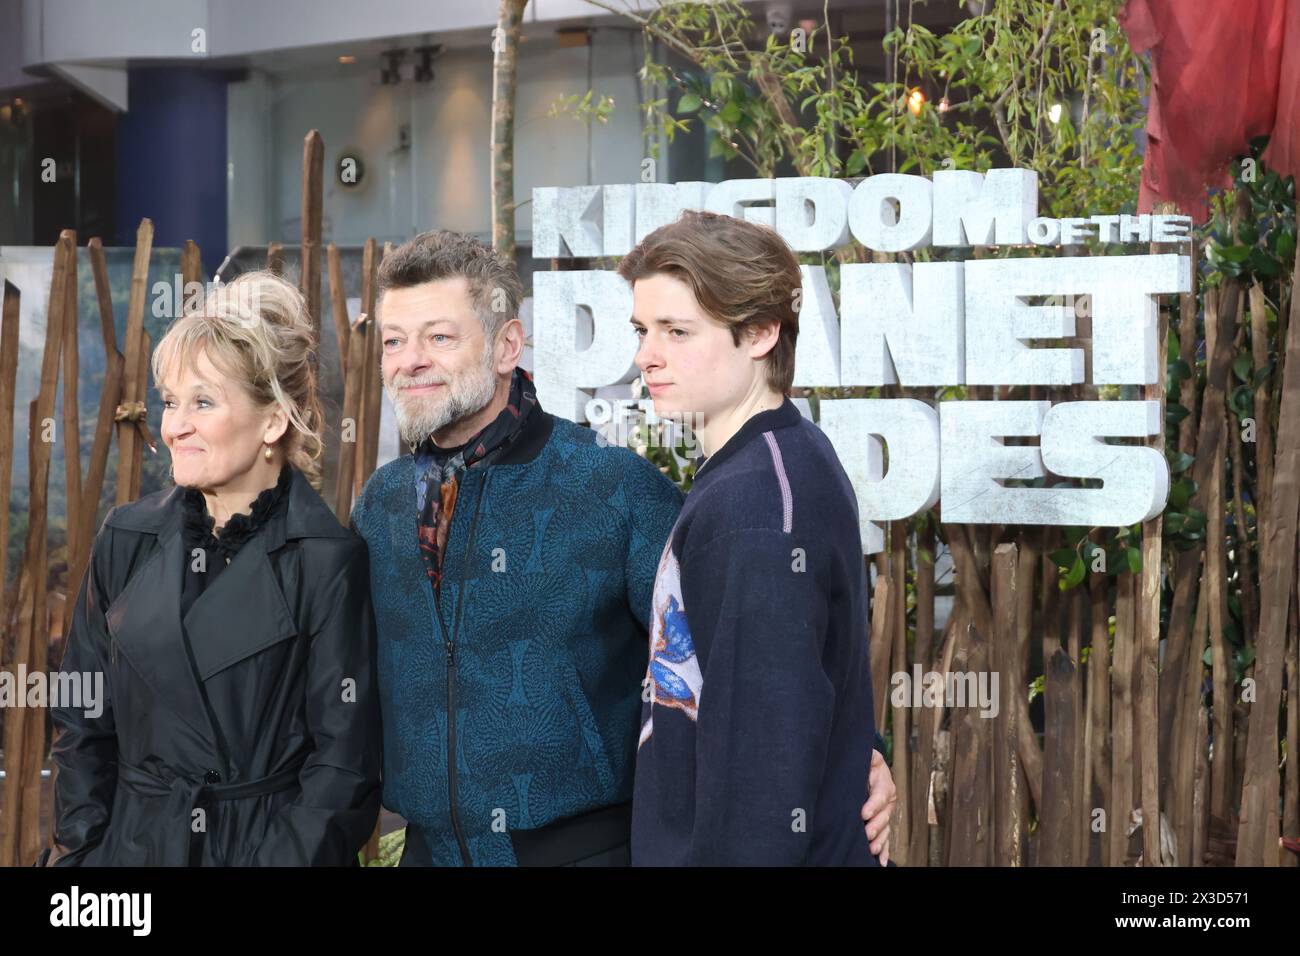 Louis Serkis, Andy Serkis and Lorraine Ashbourne, Kingdom of the Planet of the Apes - Footage Preview, BFI IMAX, London, UK, 25 April 2024, Photo by R Stock Photo